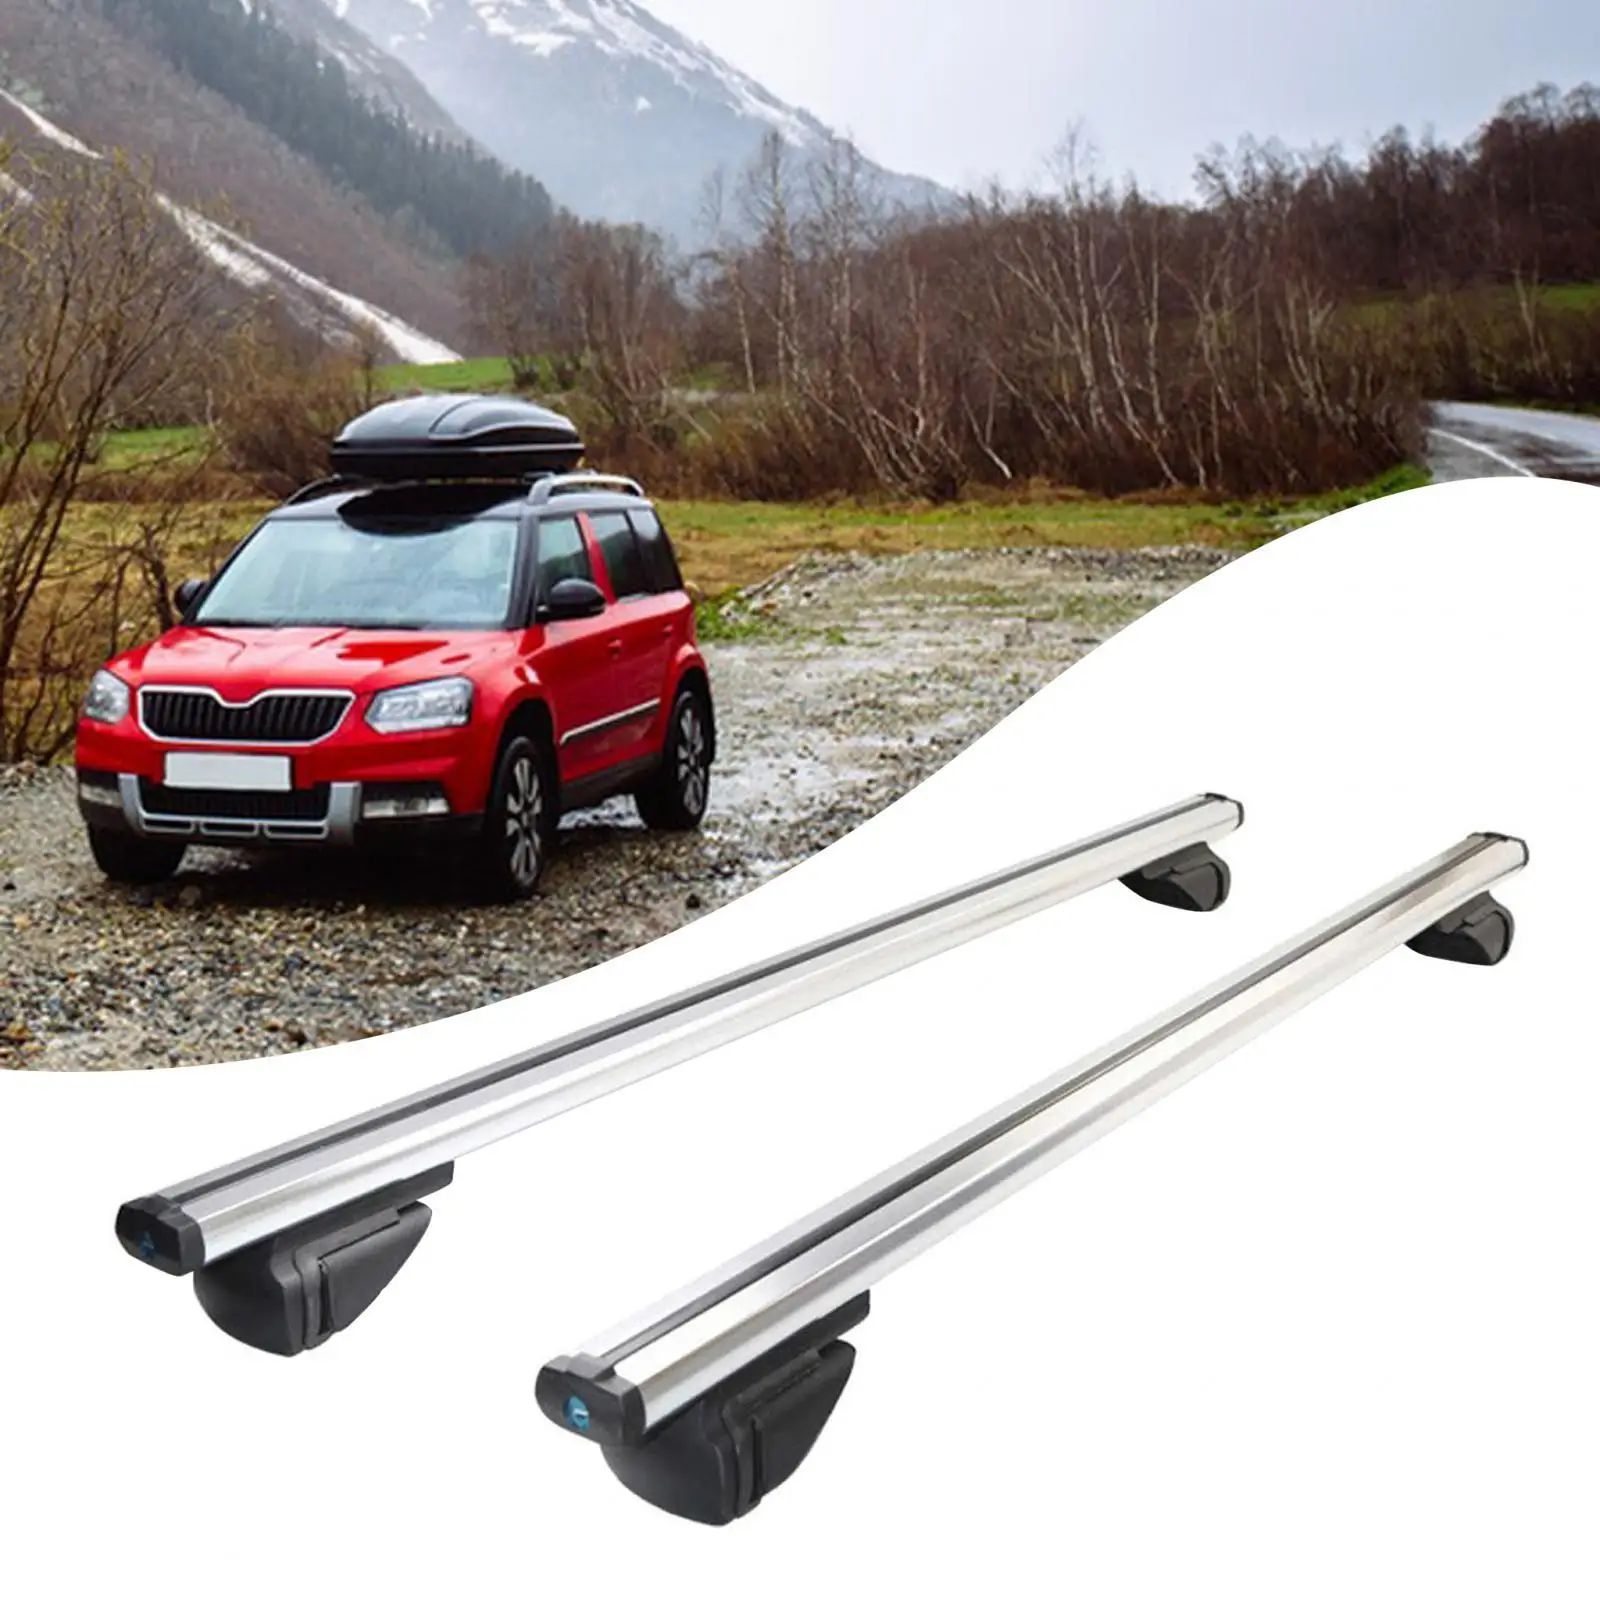 Car Roof Racks Cross Bars Luggage Carrier Heavy Duty Easy to Install Aluminum Alloy Crossbars for Automobiles Most Car SUV